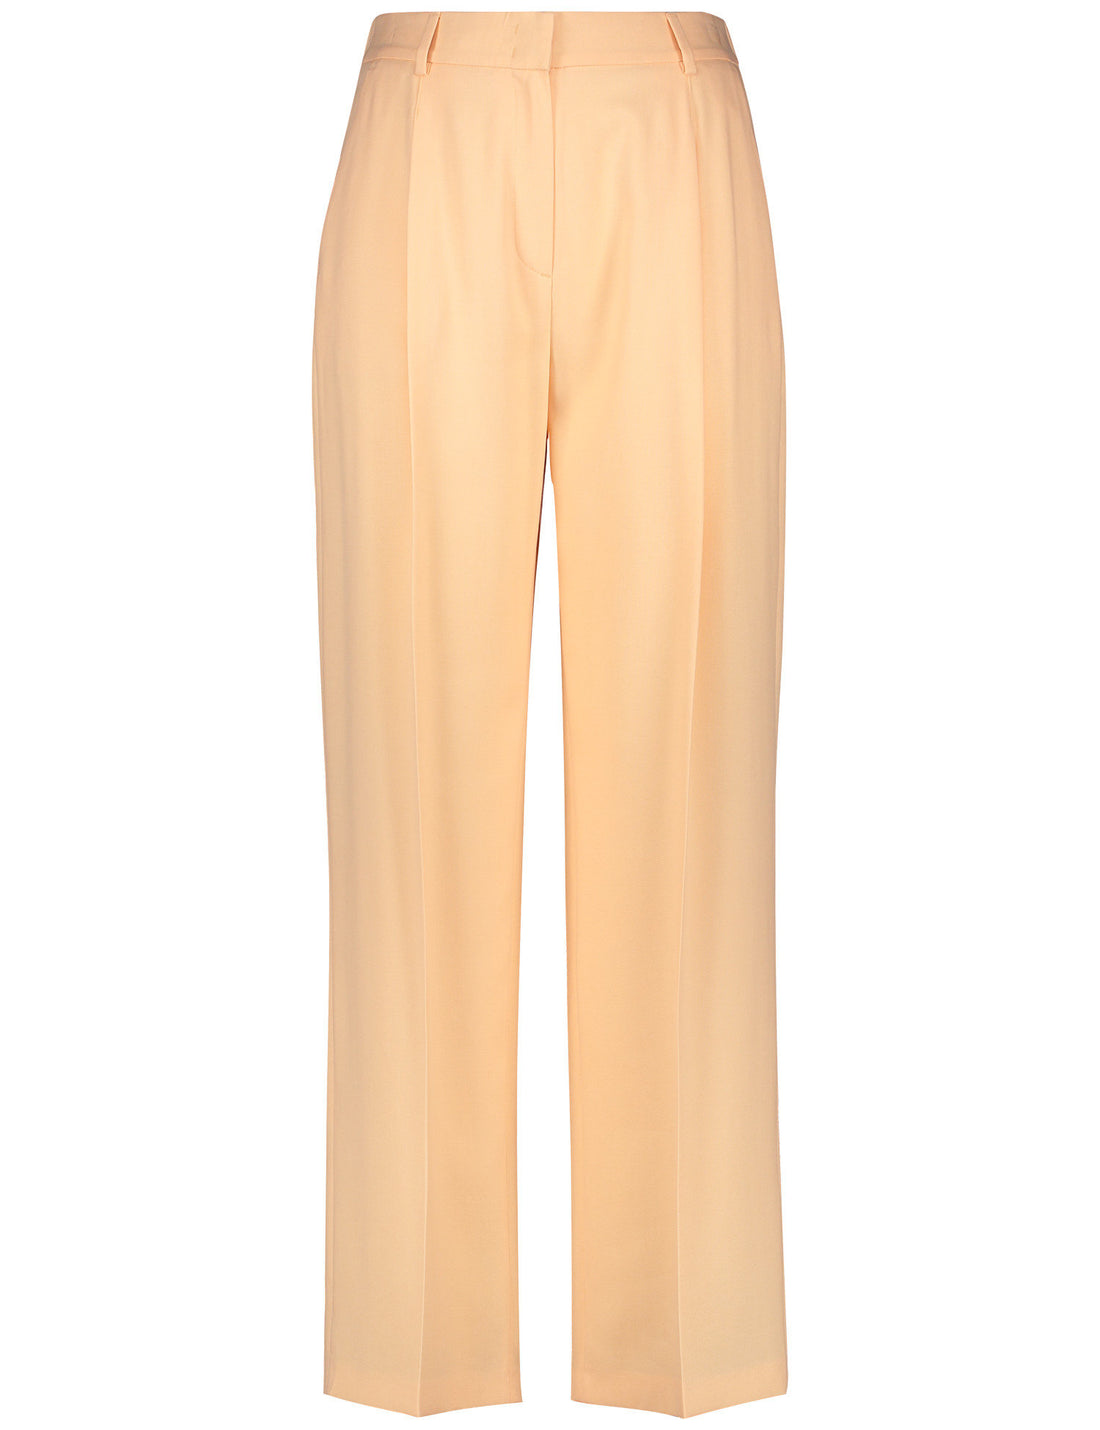 Elegant Trousers With Pressed Pleats_320021-31267_60315_01